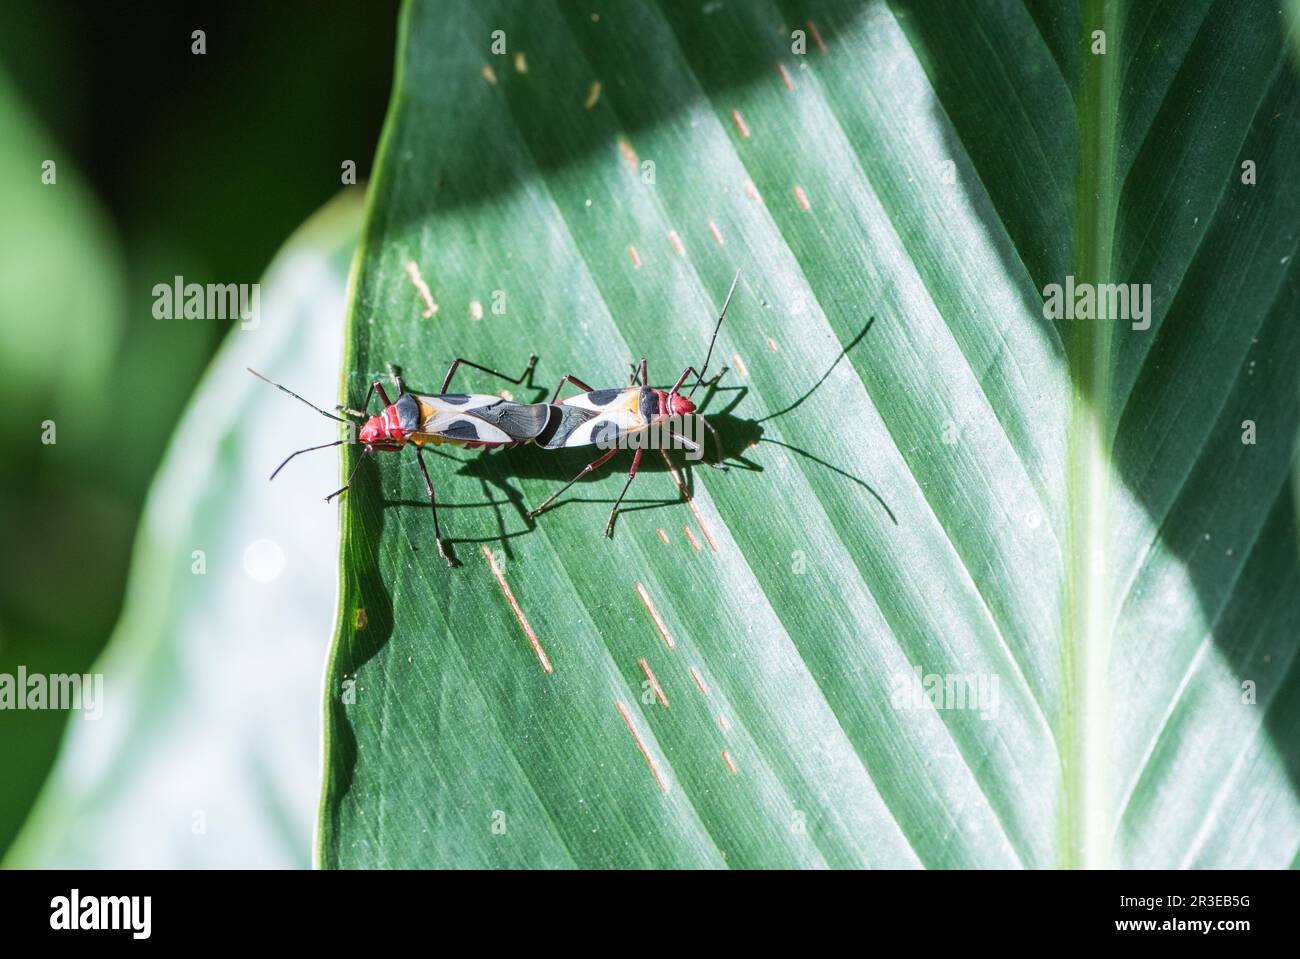 Pair of mating Cotton Stainer bugs (Dysdercus sp.) in Panama Stock Photo